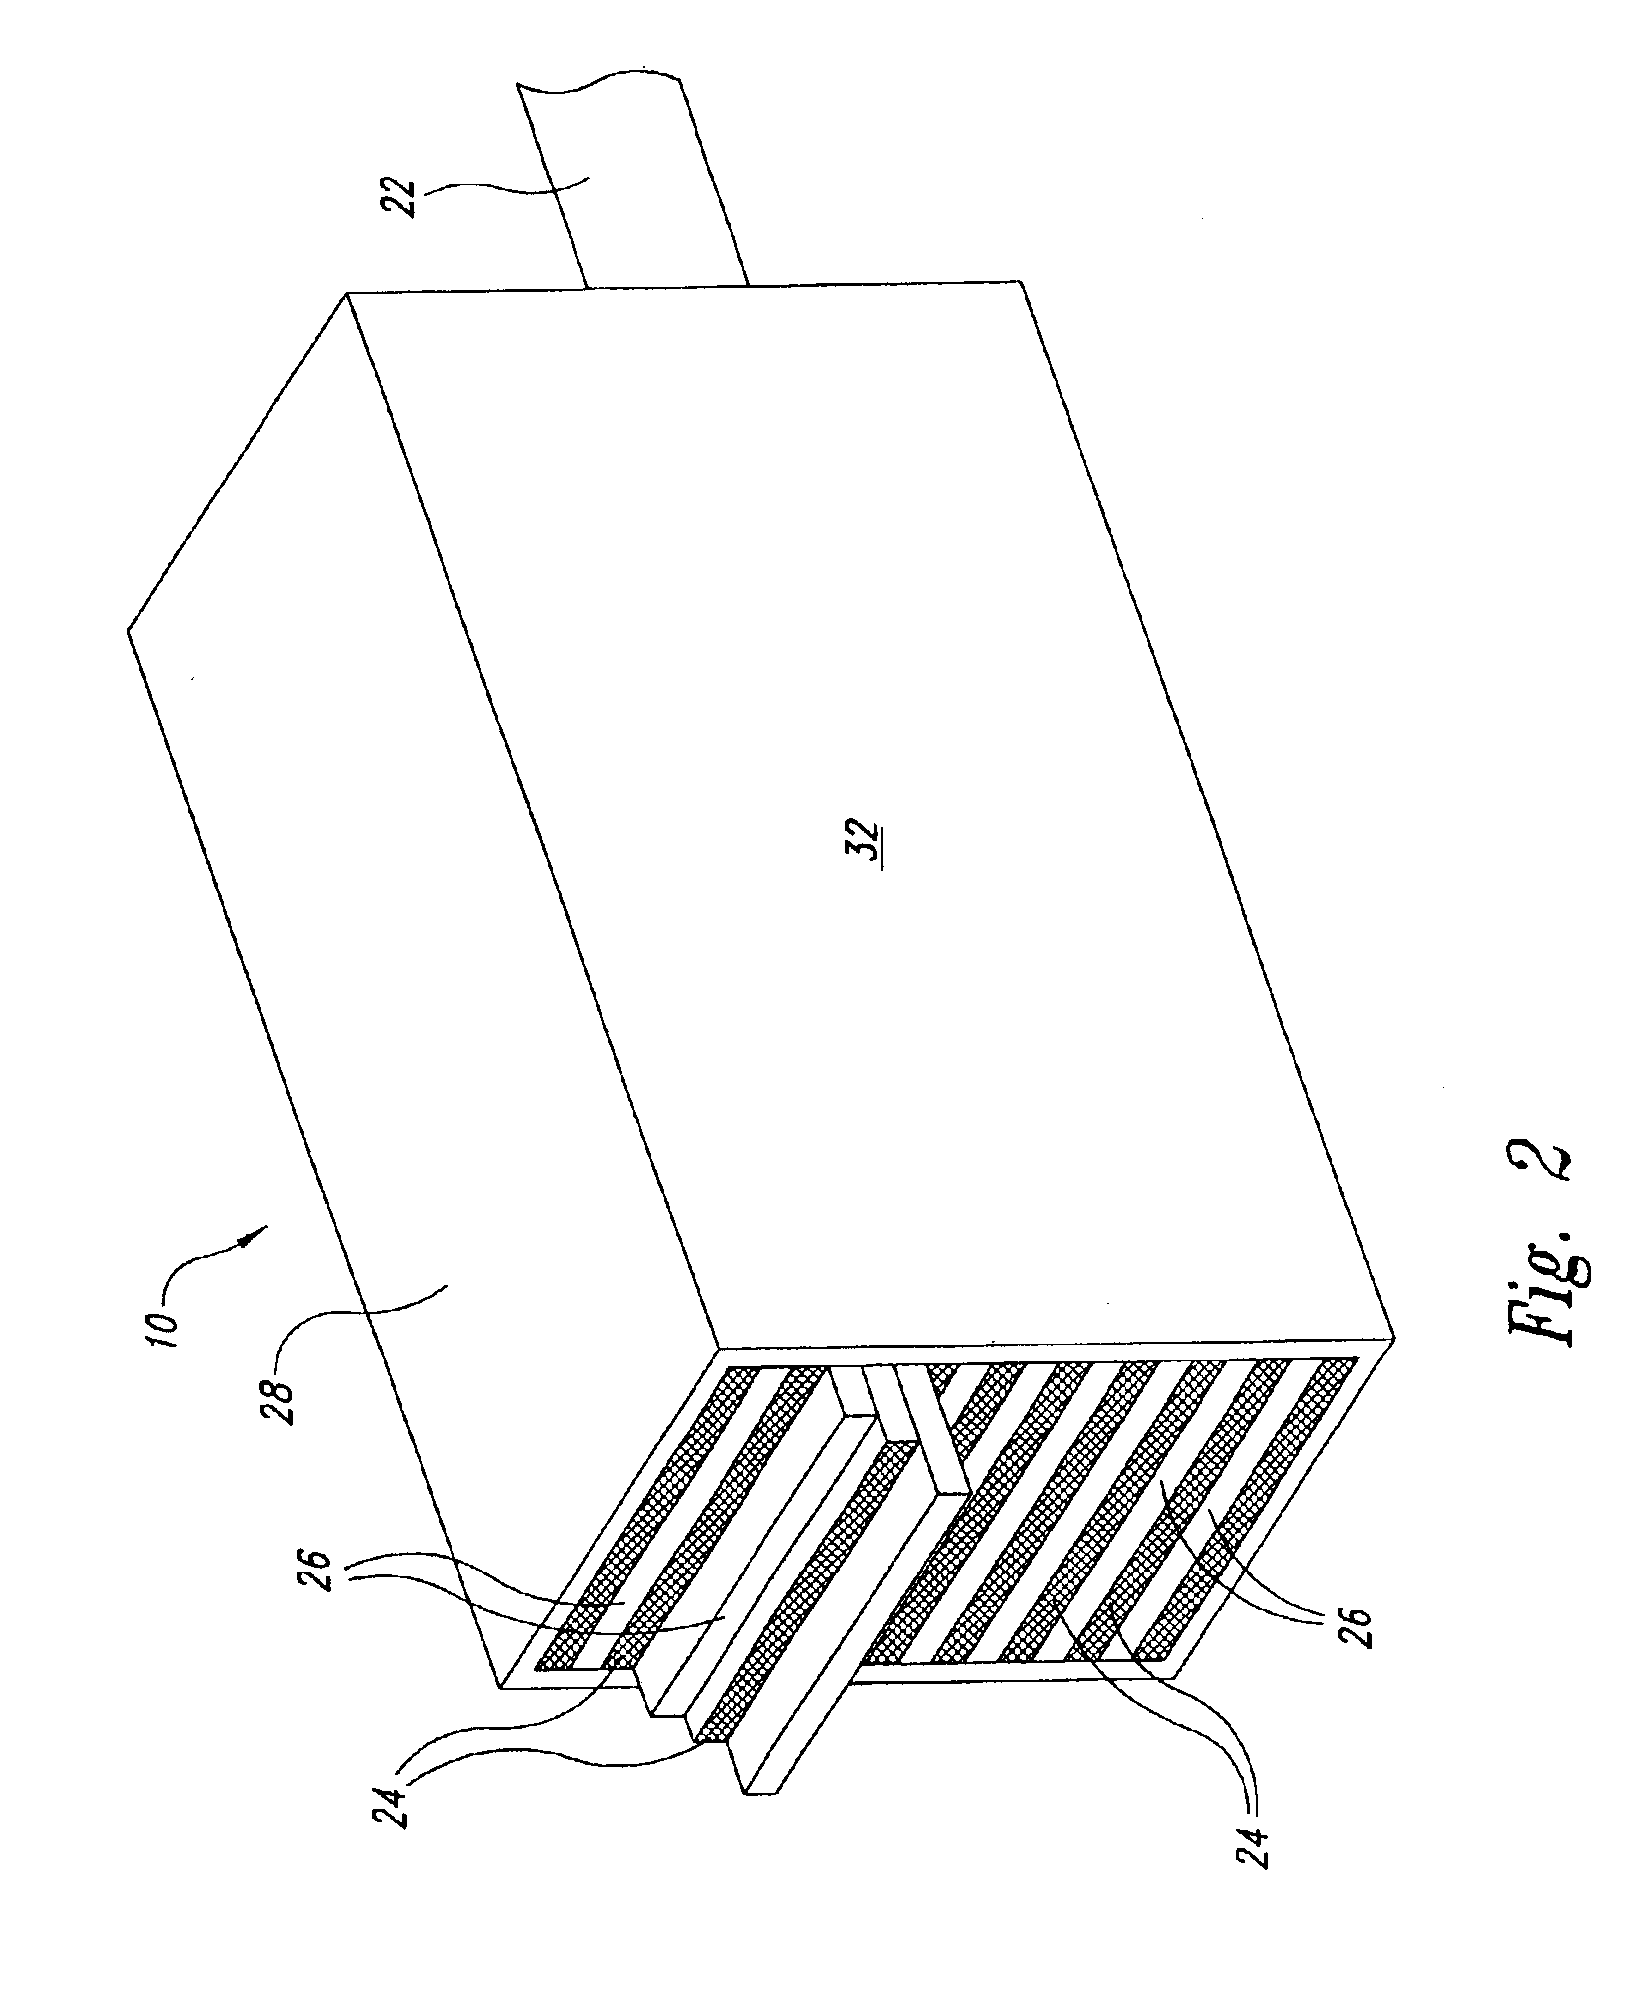 Metal lamination method and structure